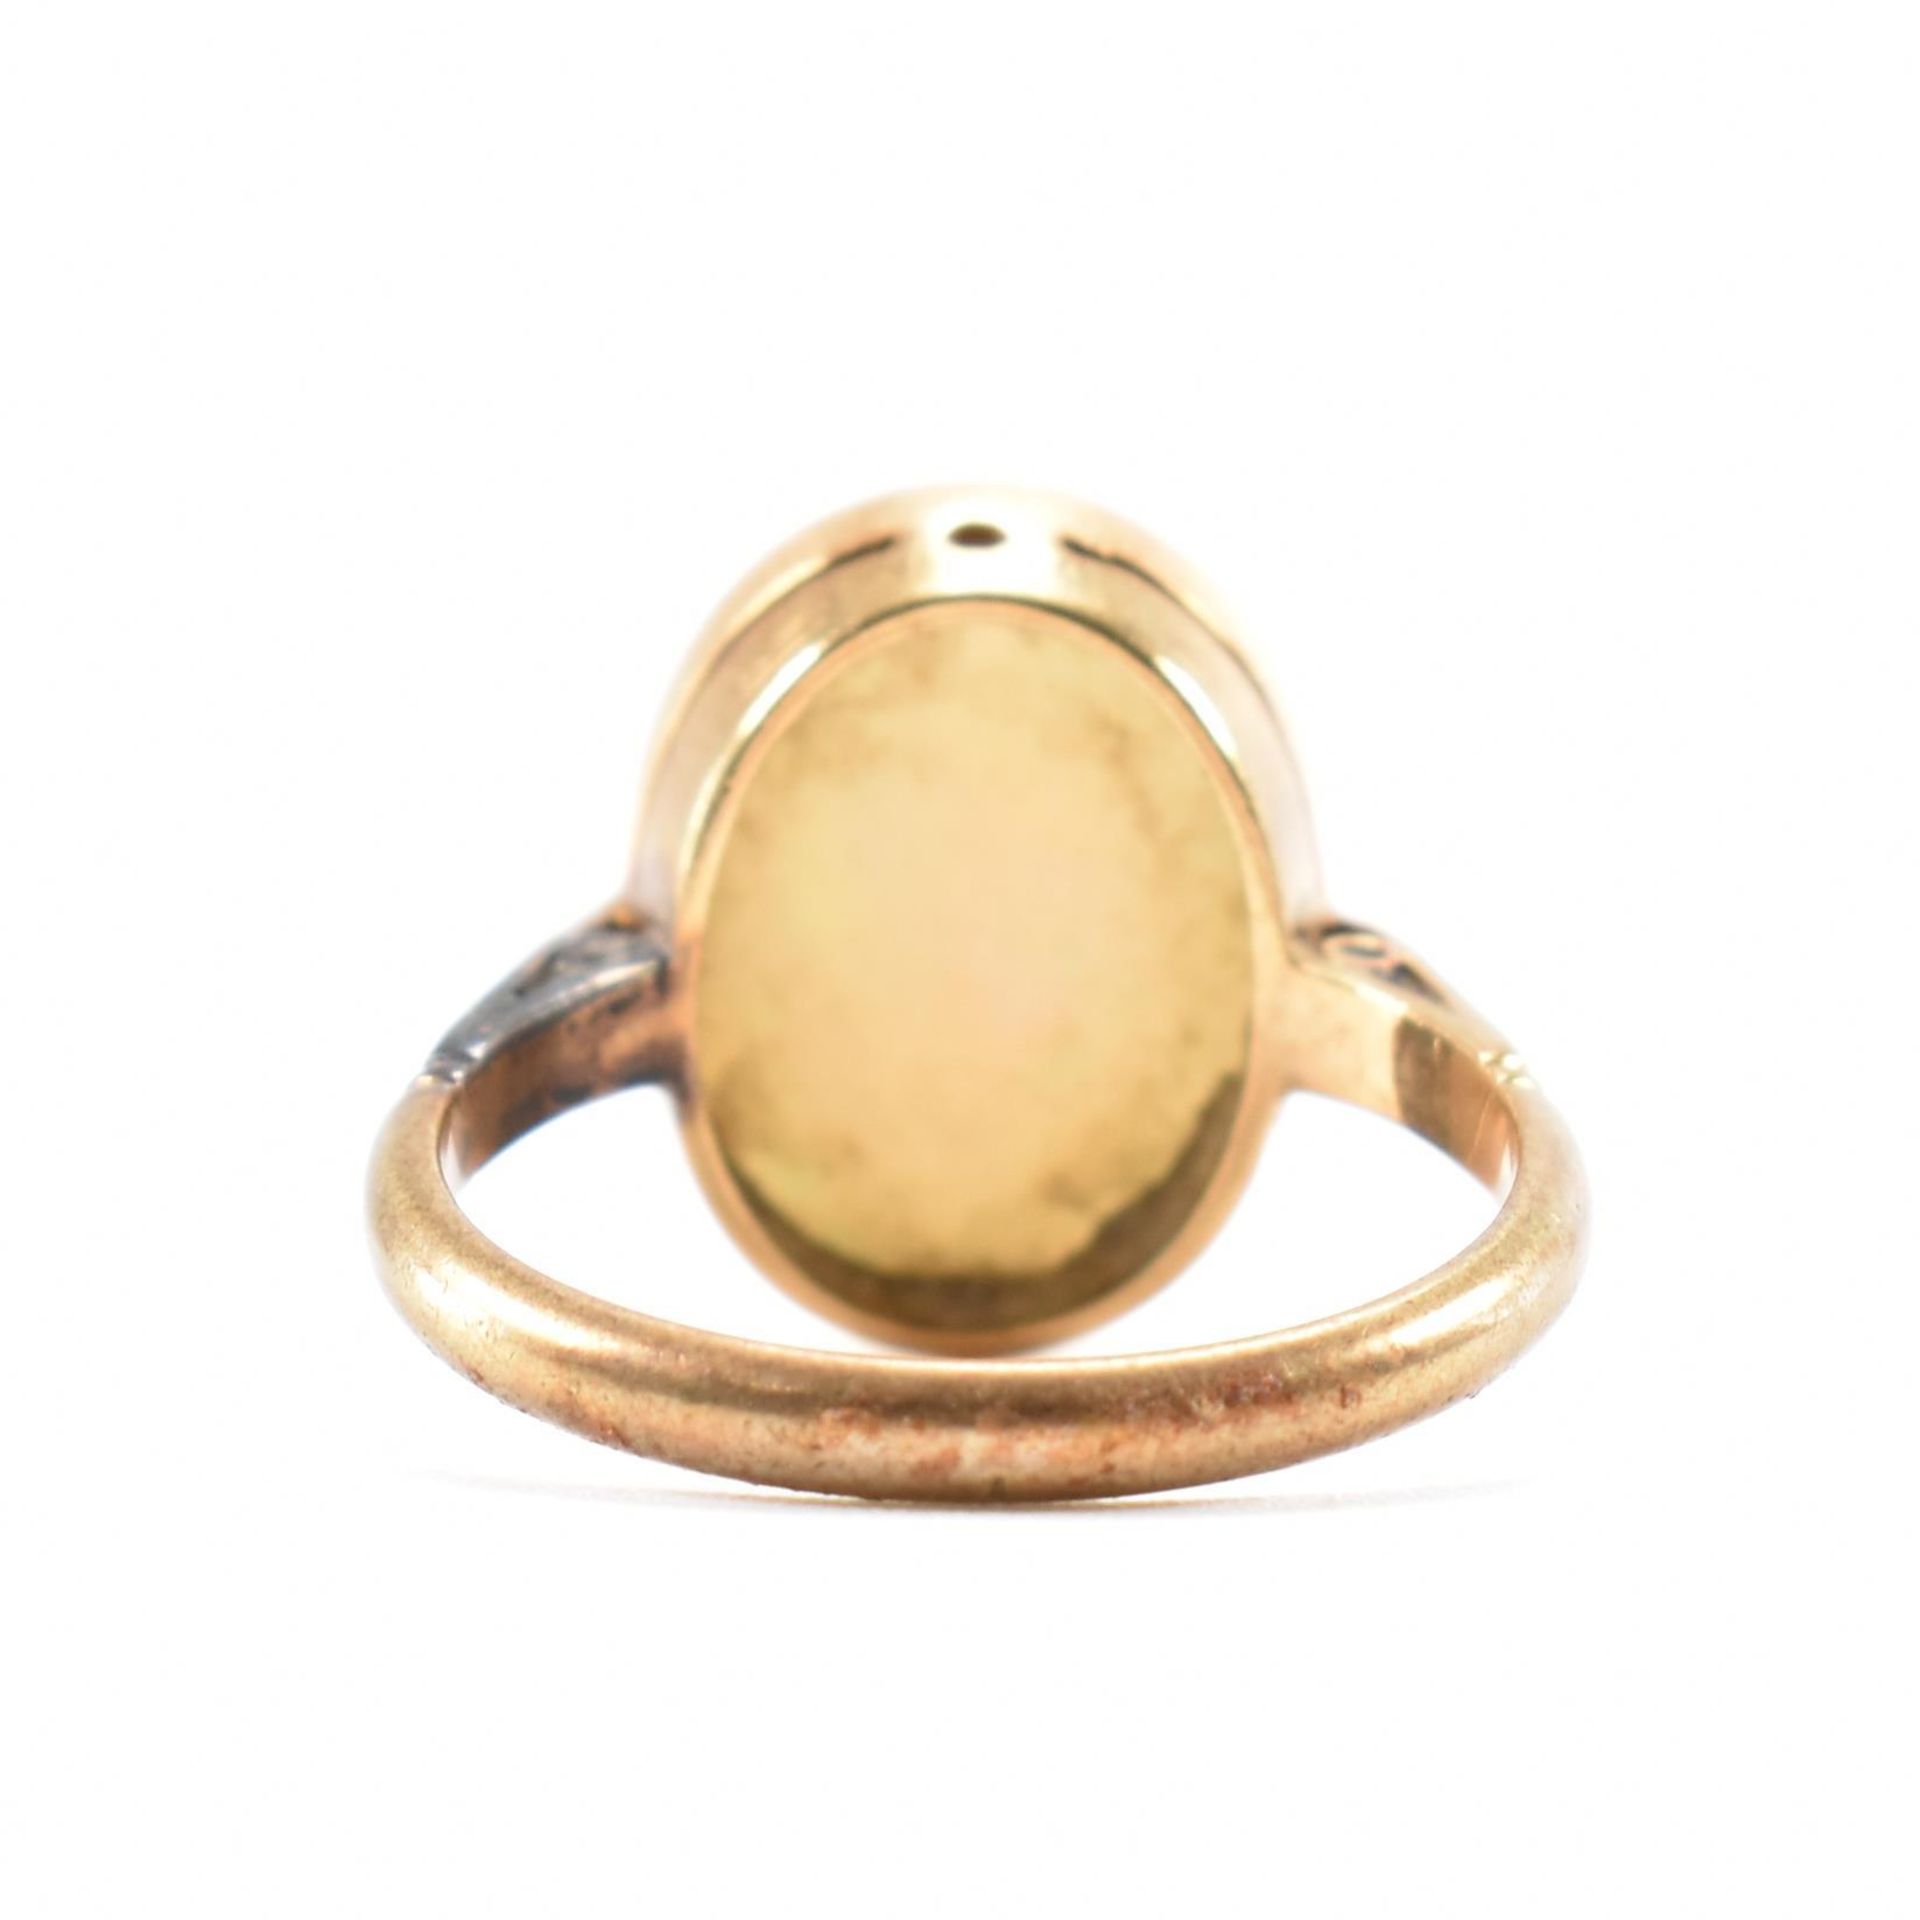 VINTAGE GOLD OPAL CABOCHON RING - Image 3 of 7